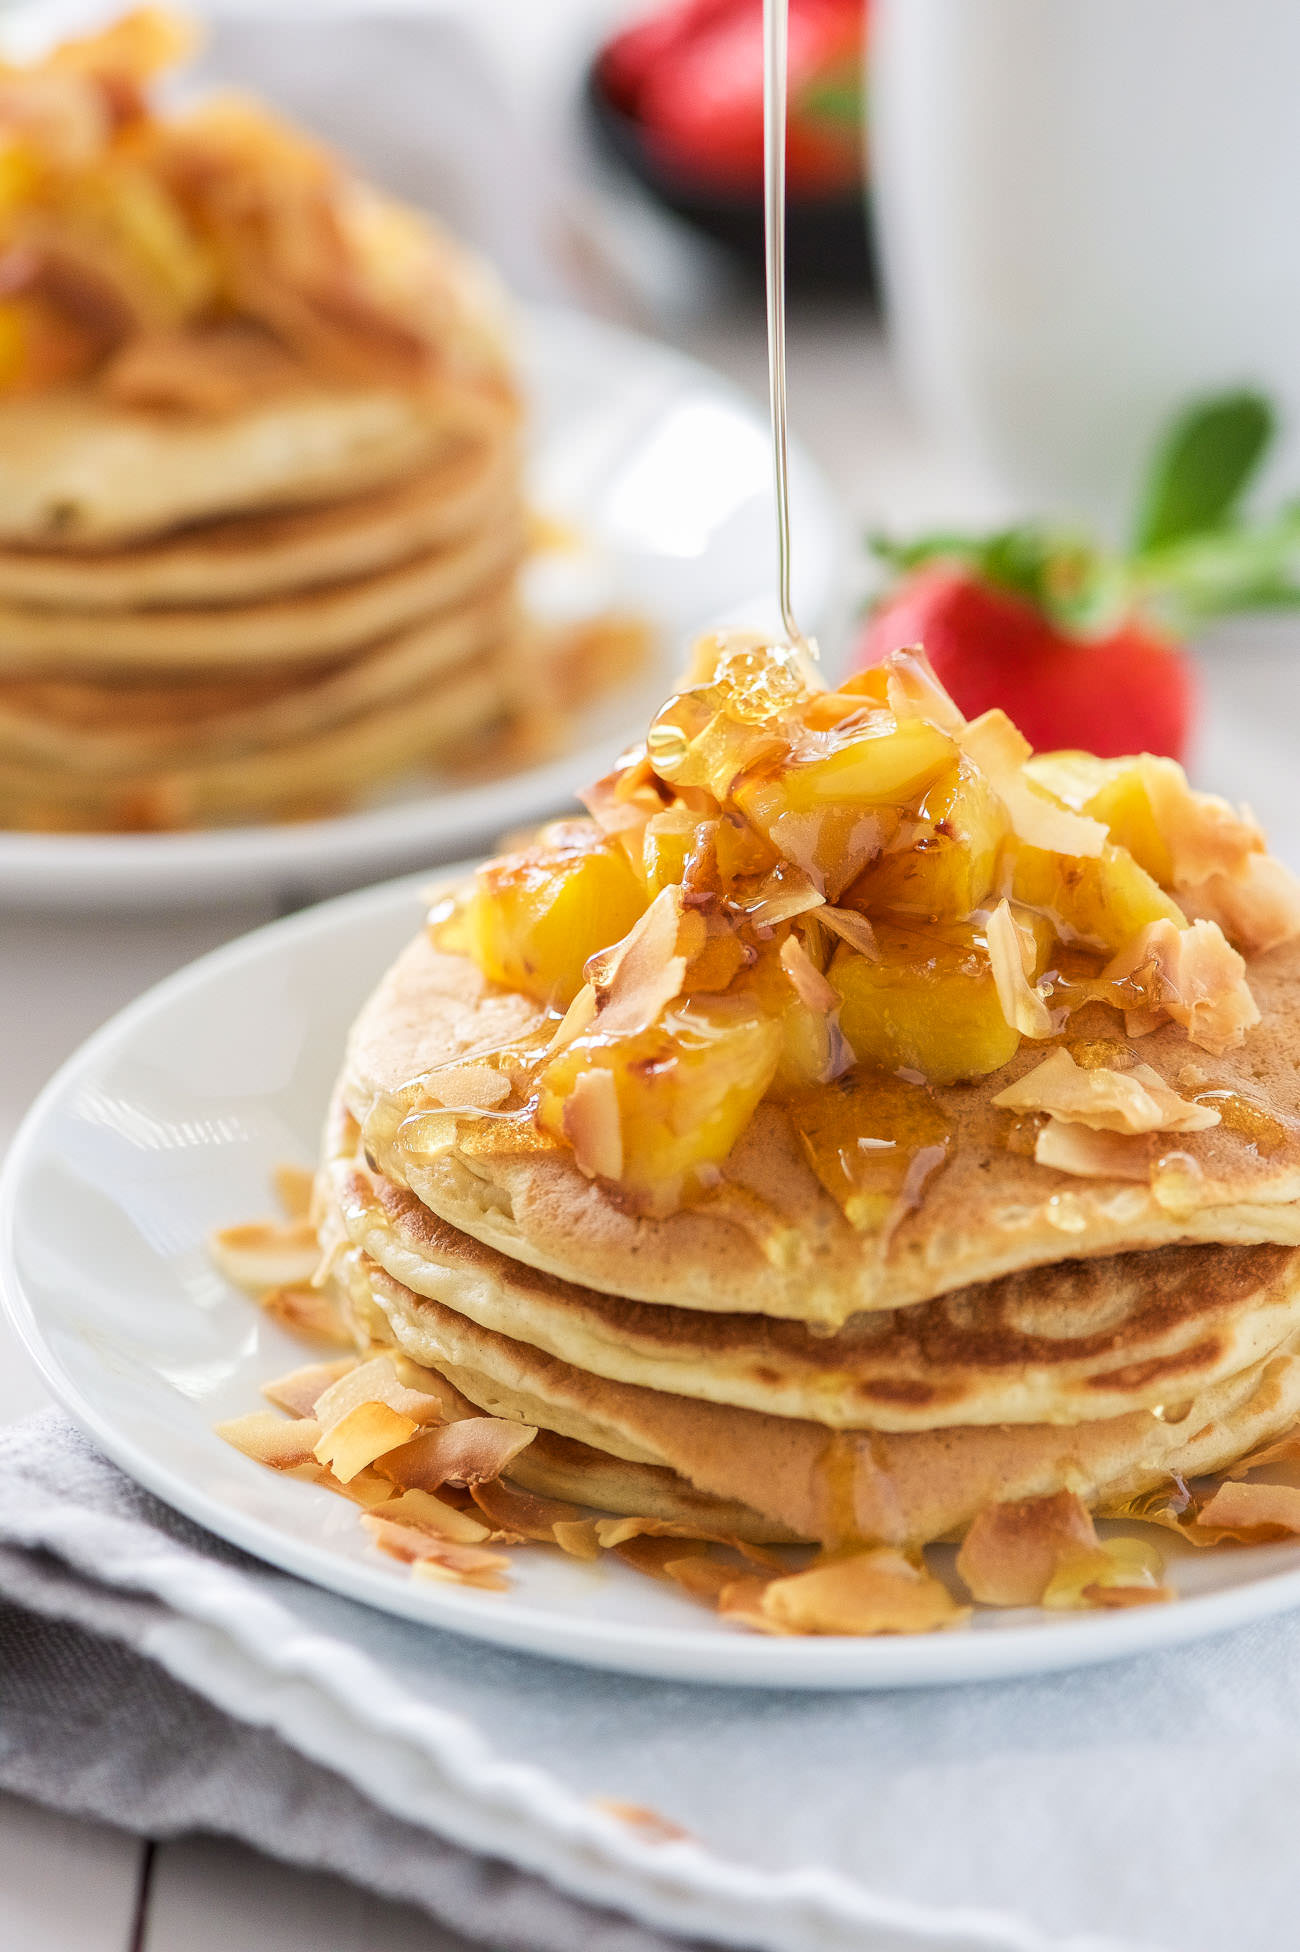 These Honey Pineapple and Toasted Coconut Pancakes are light, fluffy and filled with tropical flavors! These pancakes are the perfect start to a weekend breakfast or brunch!